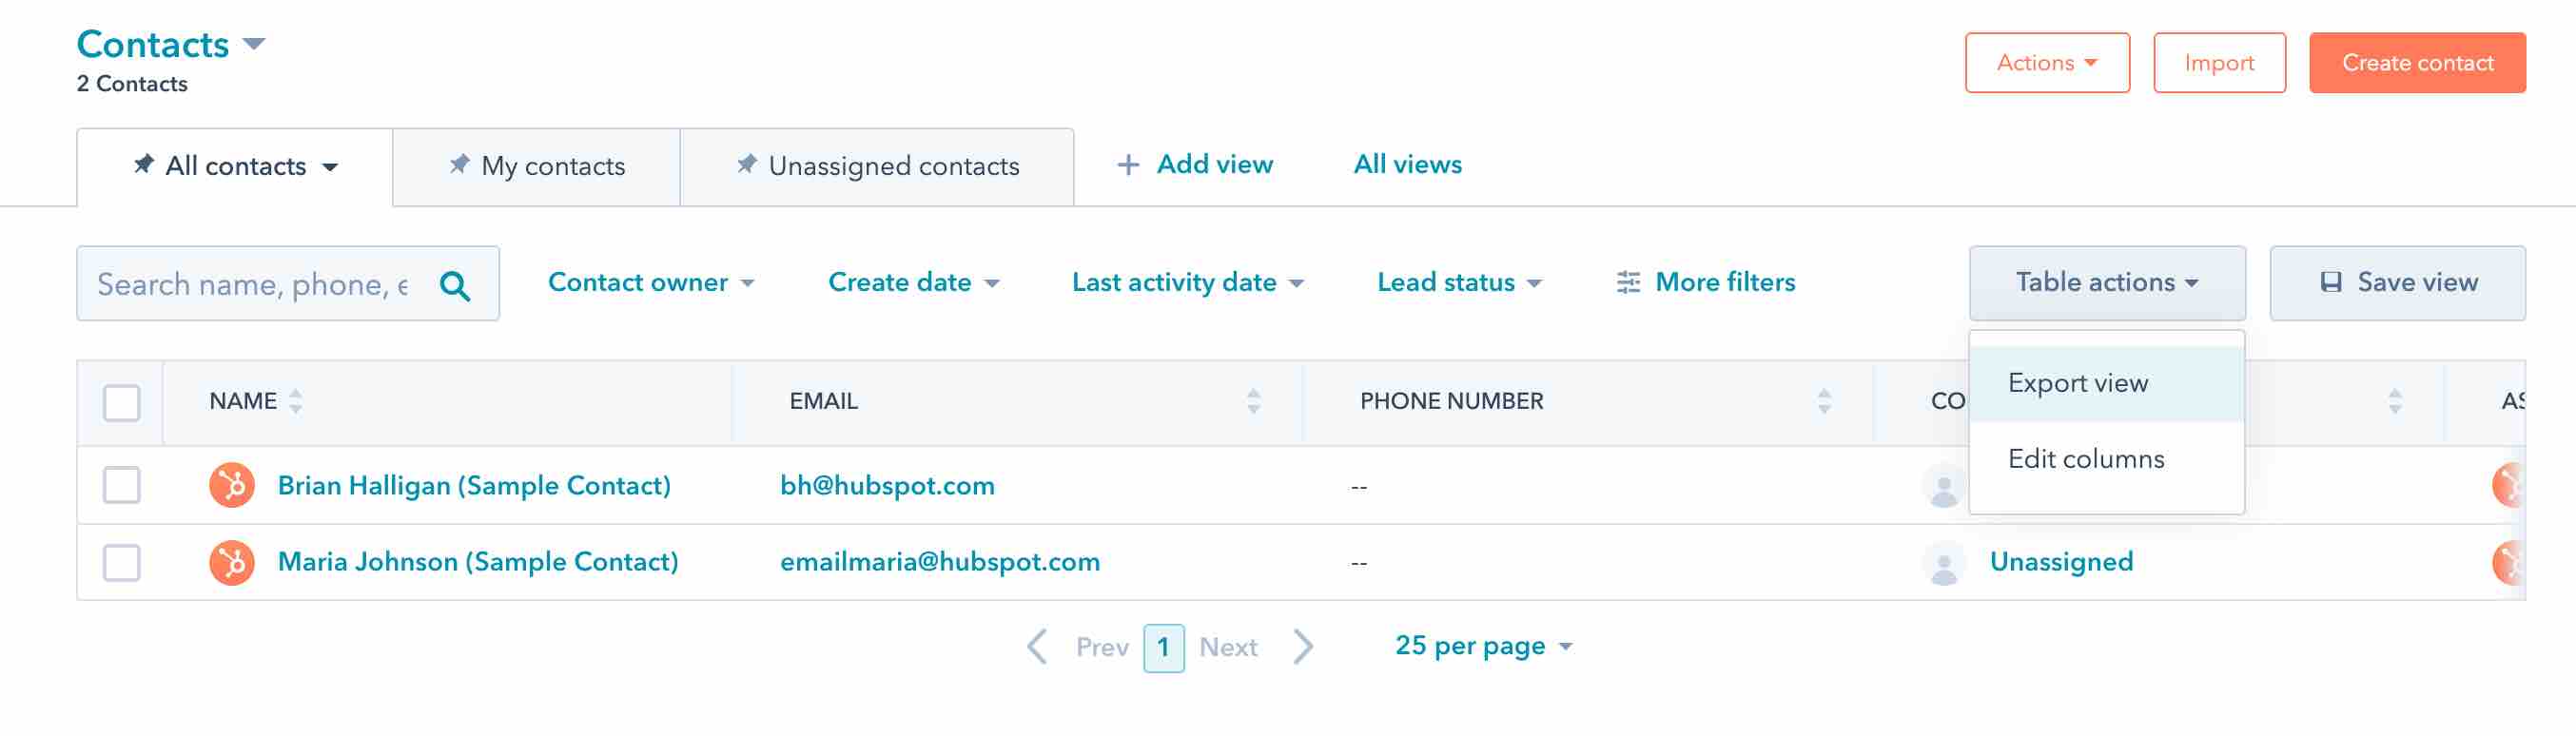 Contacts page in Hubspot on All Contacts tab with Table actions menu open